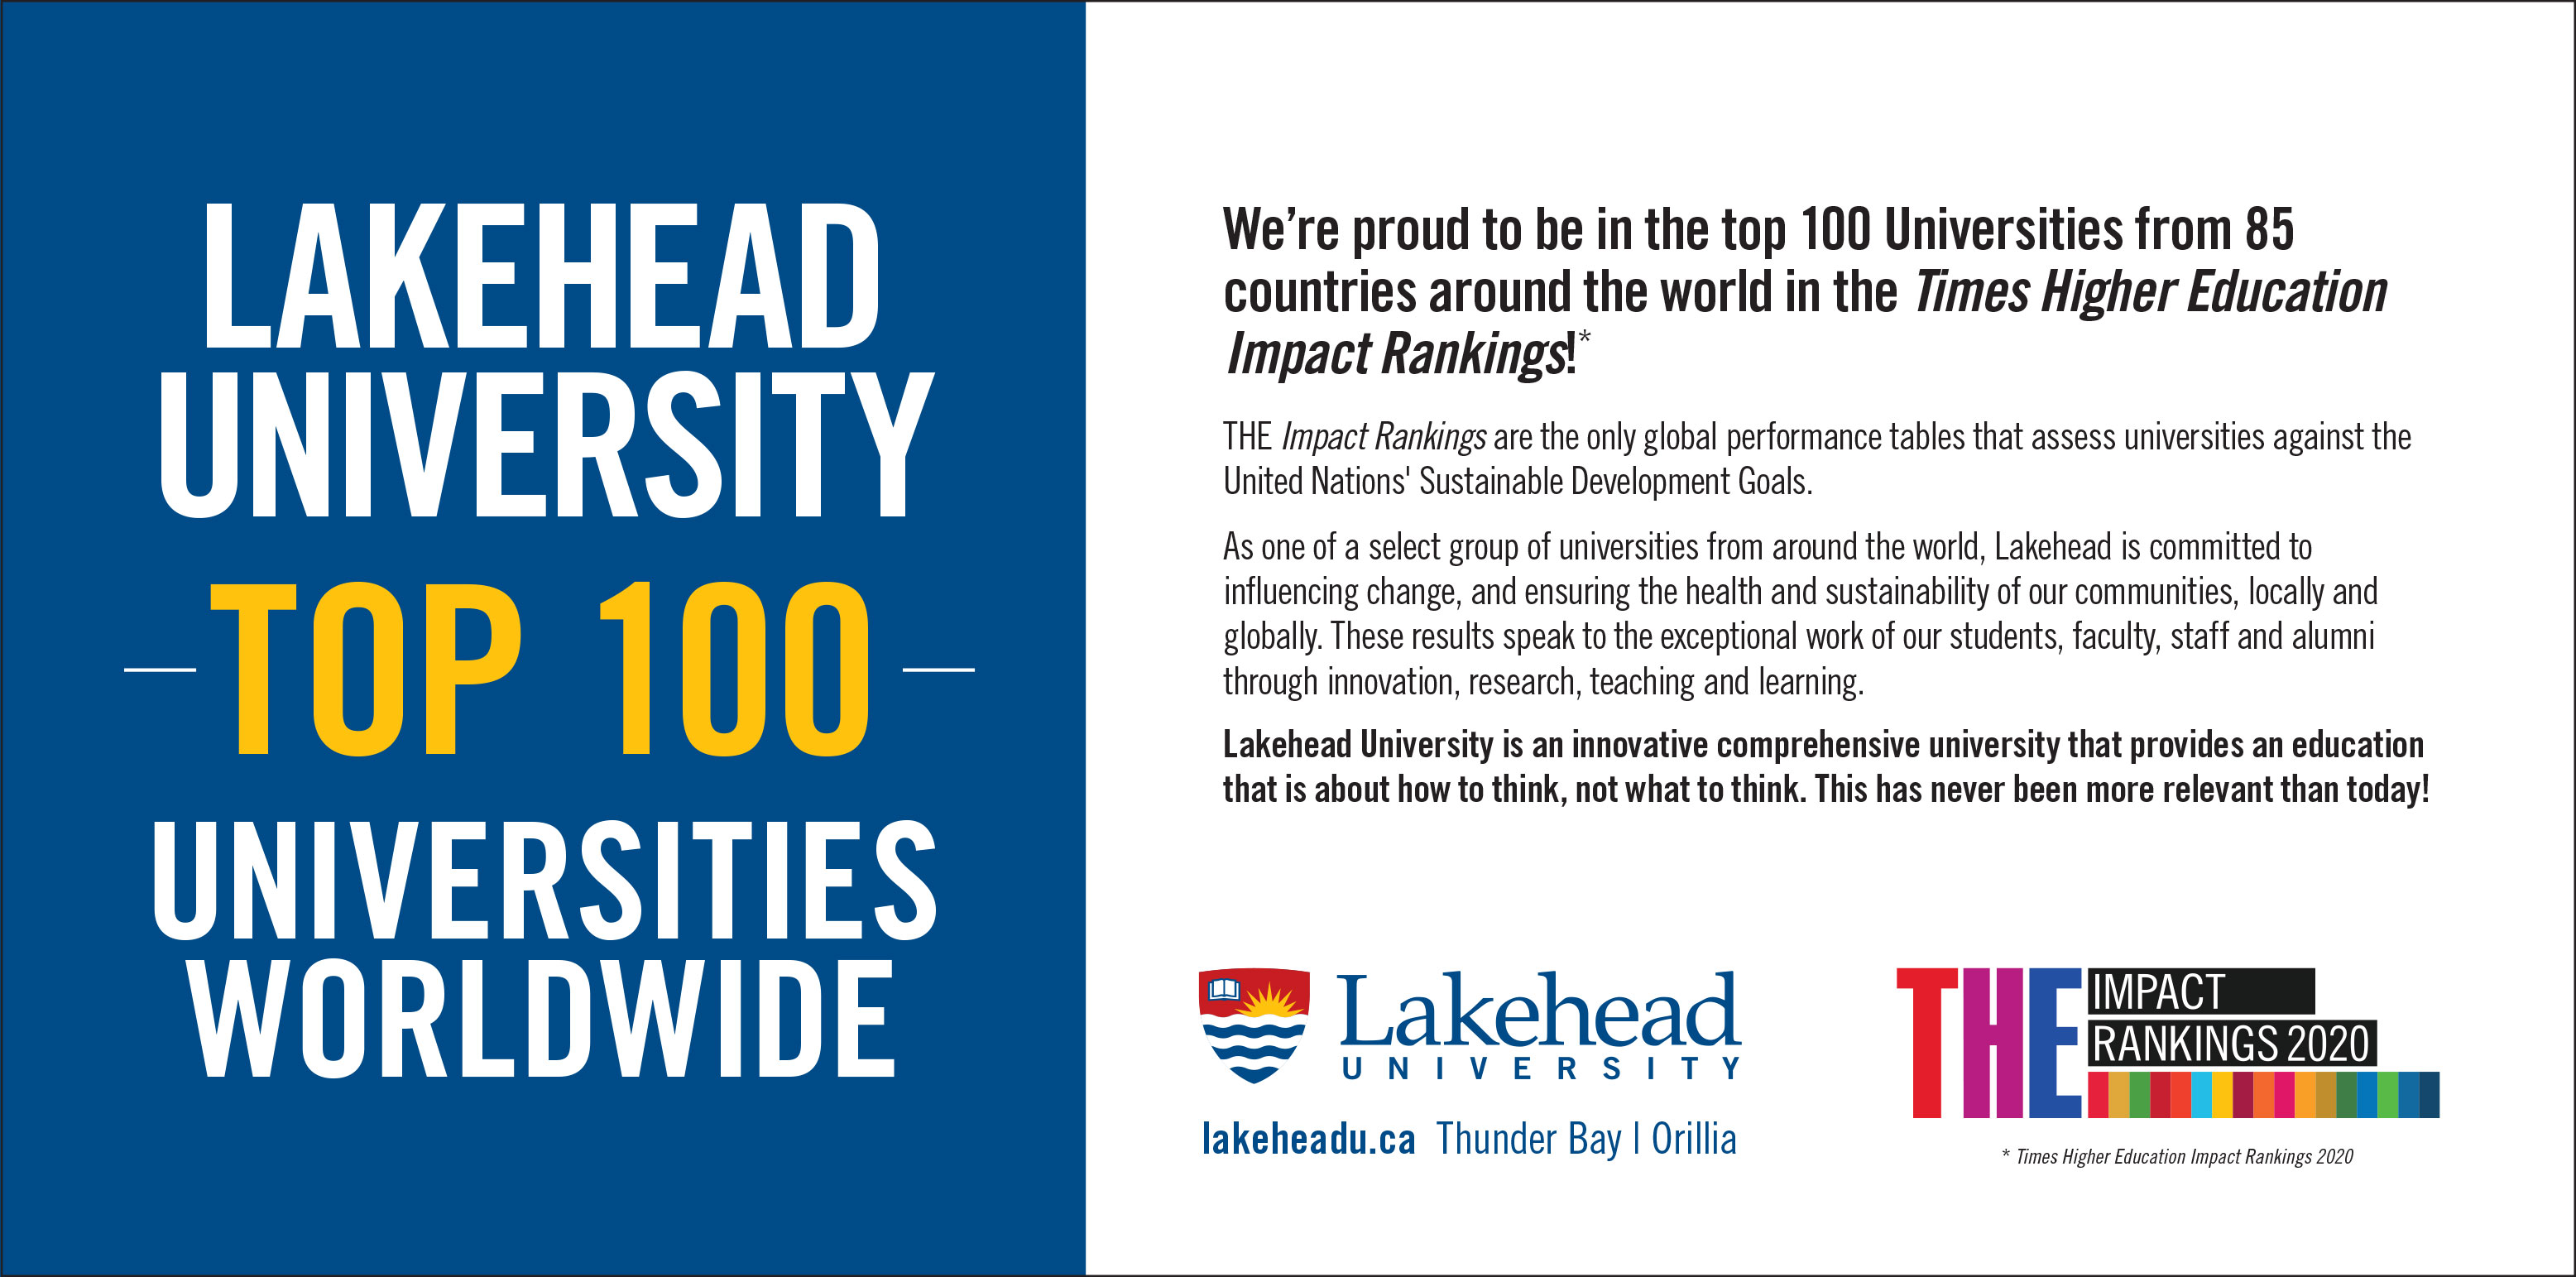 We're proud to be at the top of the Times Higher Education Impact Ranks. This image is a statement about that